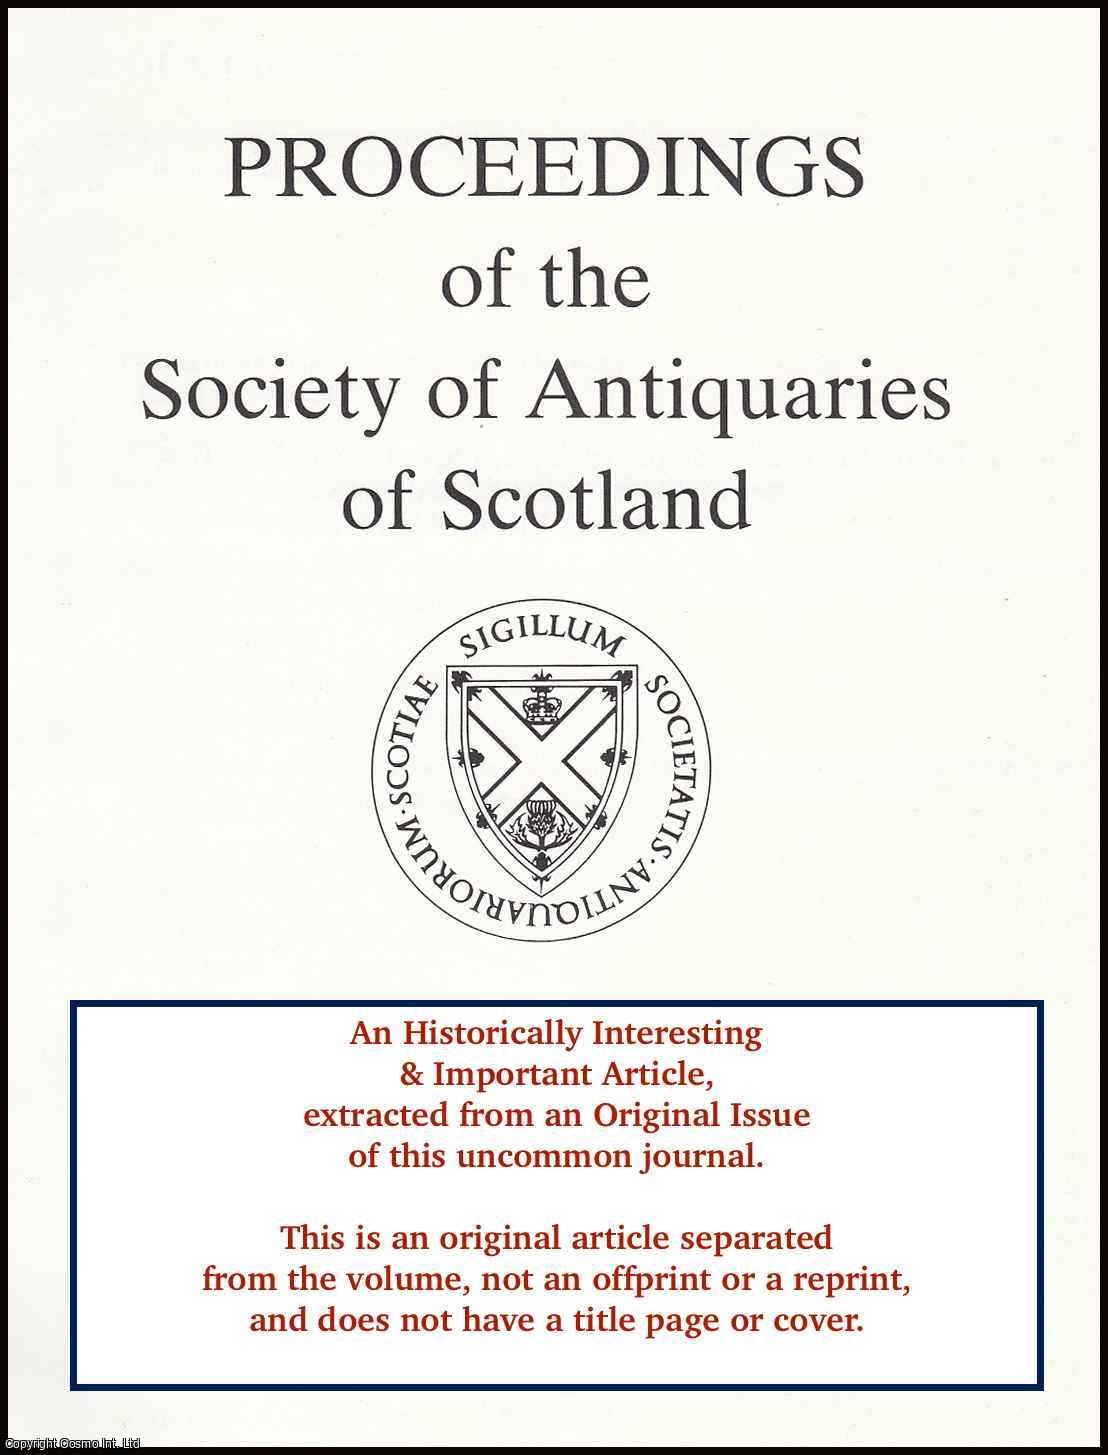 John Burnett - A Note on The Silver Ball of Rattray. An original article from the Proceedings of the Society of Antiquaries of Scotland, 1998.